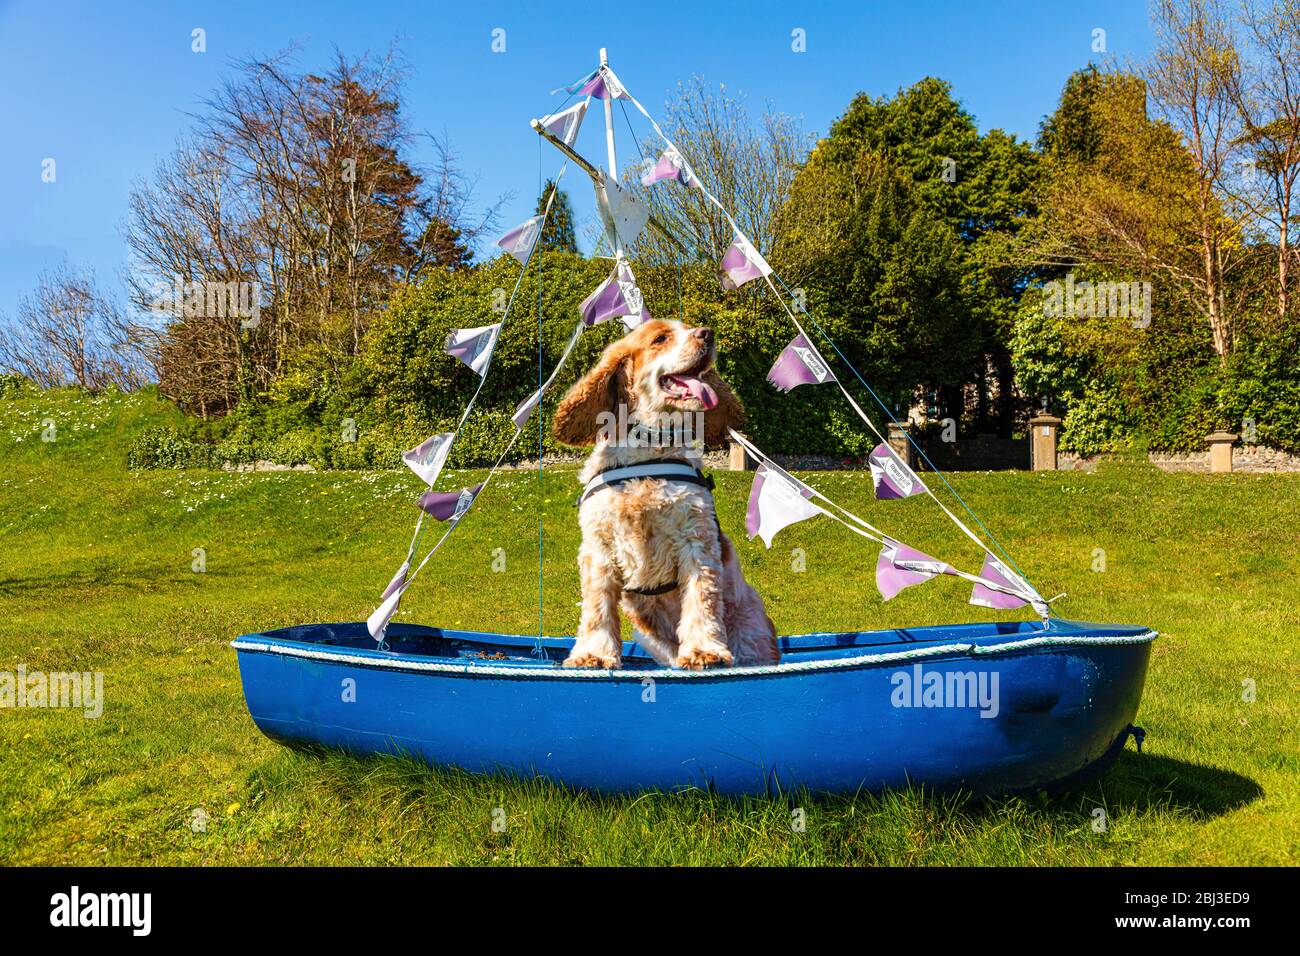 https://c8.alamy.com/comp/2BJ3ED9/friendlysmiling-english-cocker-spaniel-male-dog-on-boat-decorated-with-flags-2BJ3ED9.jpg